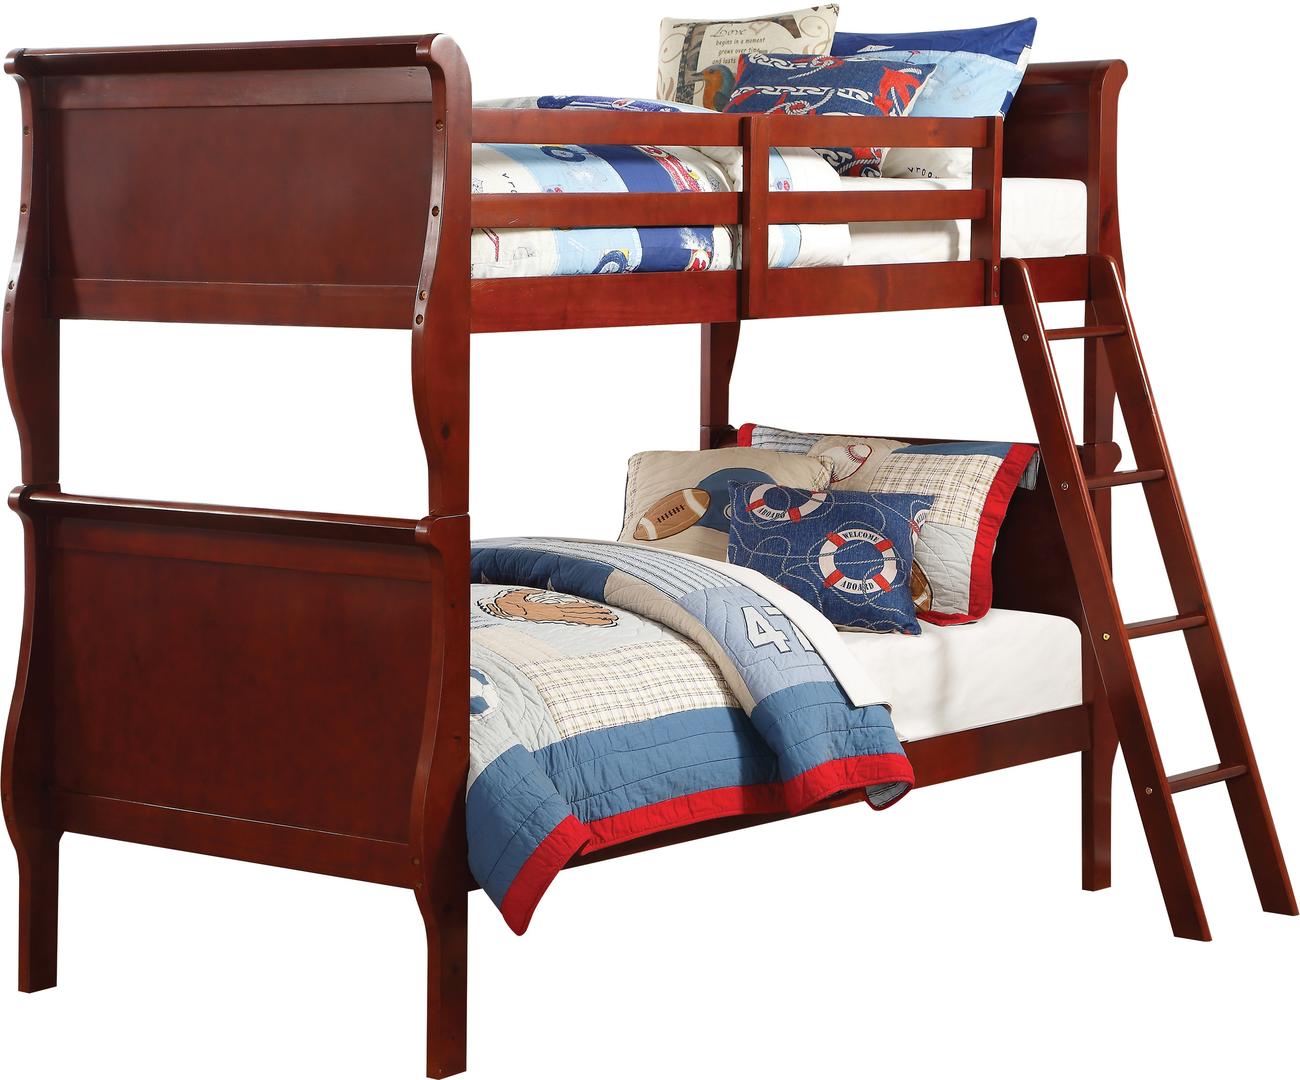 84" X 41" X 69" Cherry Pine Wood Twin Over Twin Bunk Bed